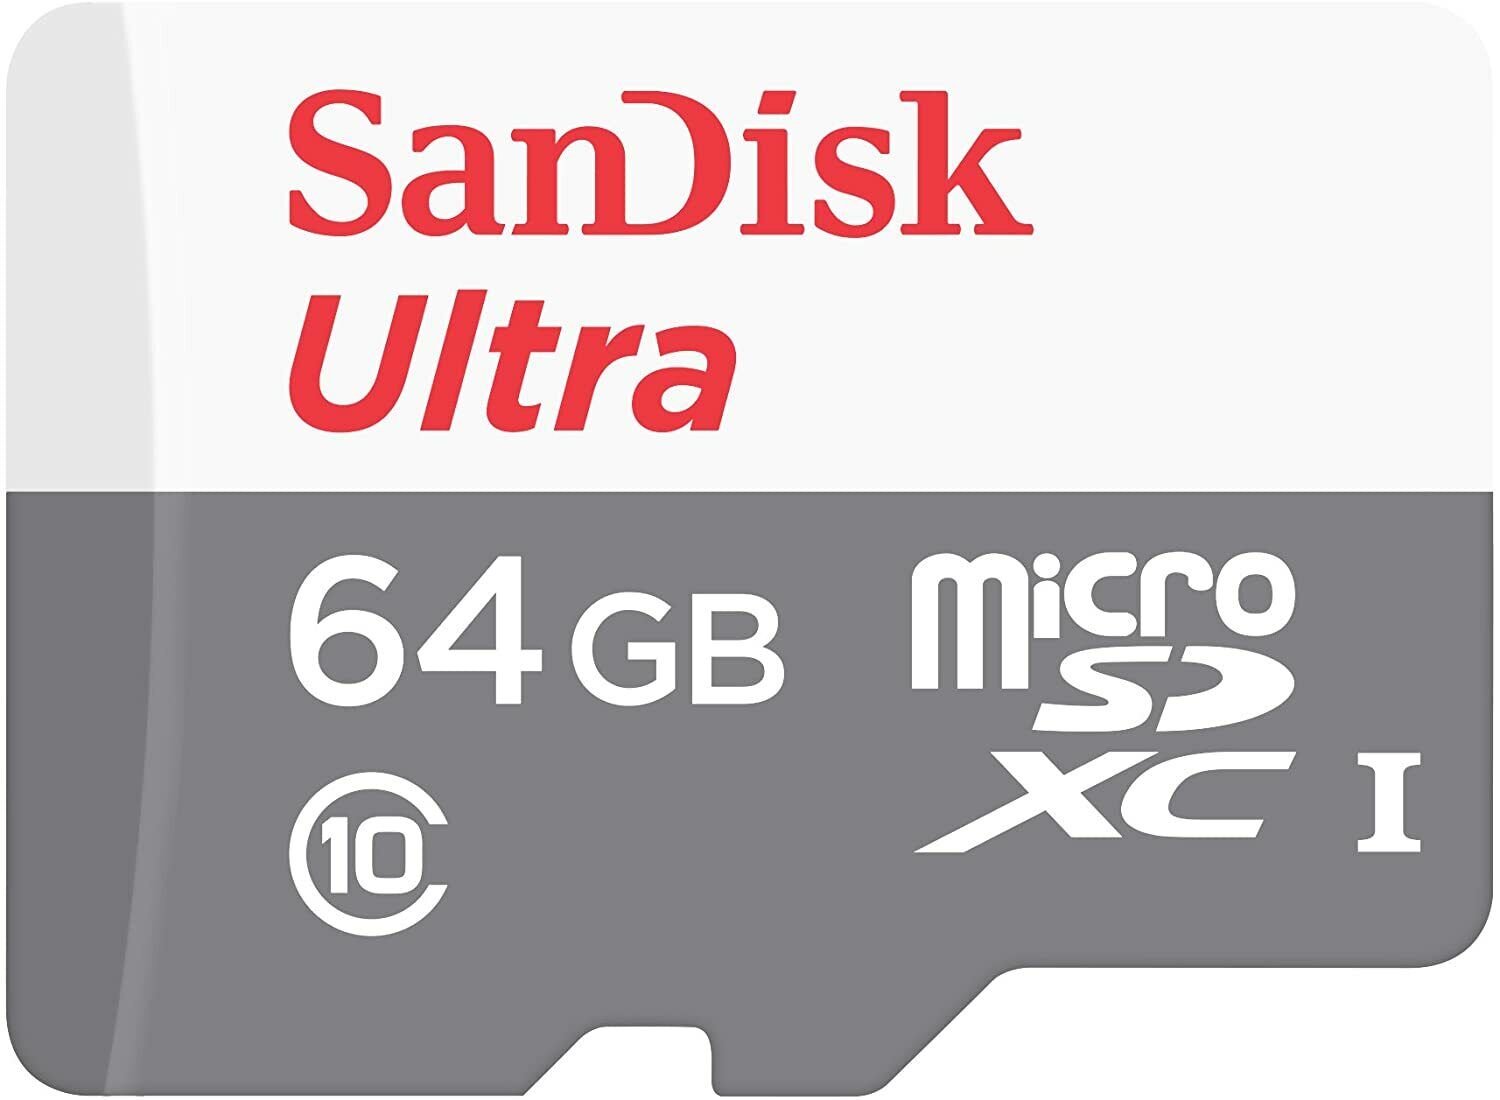 64GB MEMORY CARD SANDISK ULTRA HIGH SPEED MICROSD CLASS 10 for PHONES & TABLETS